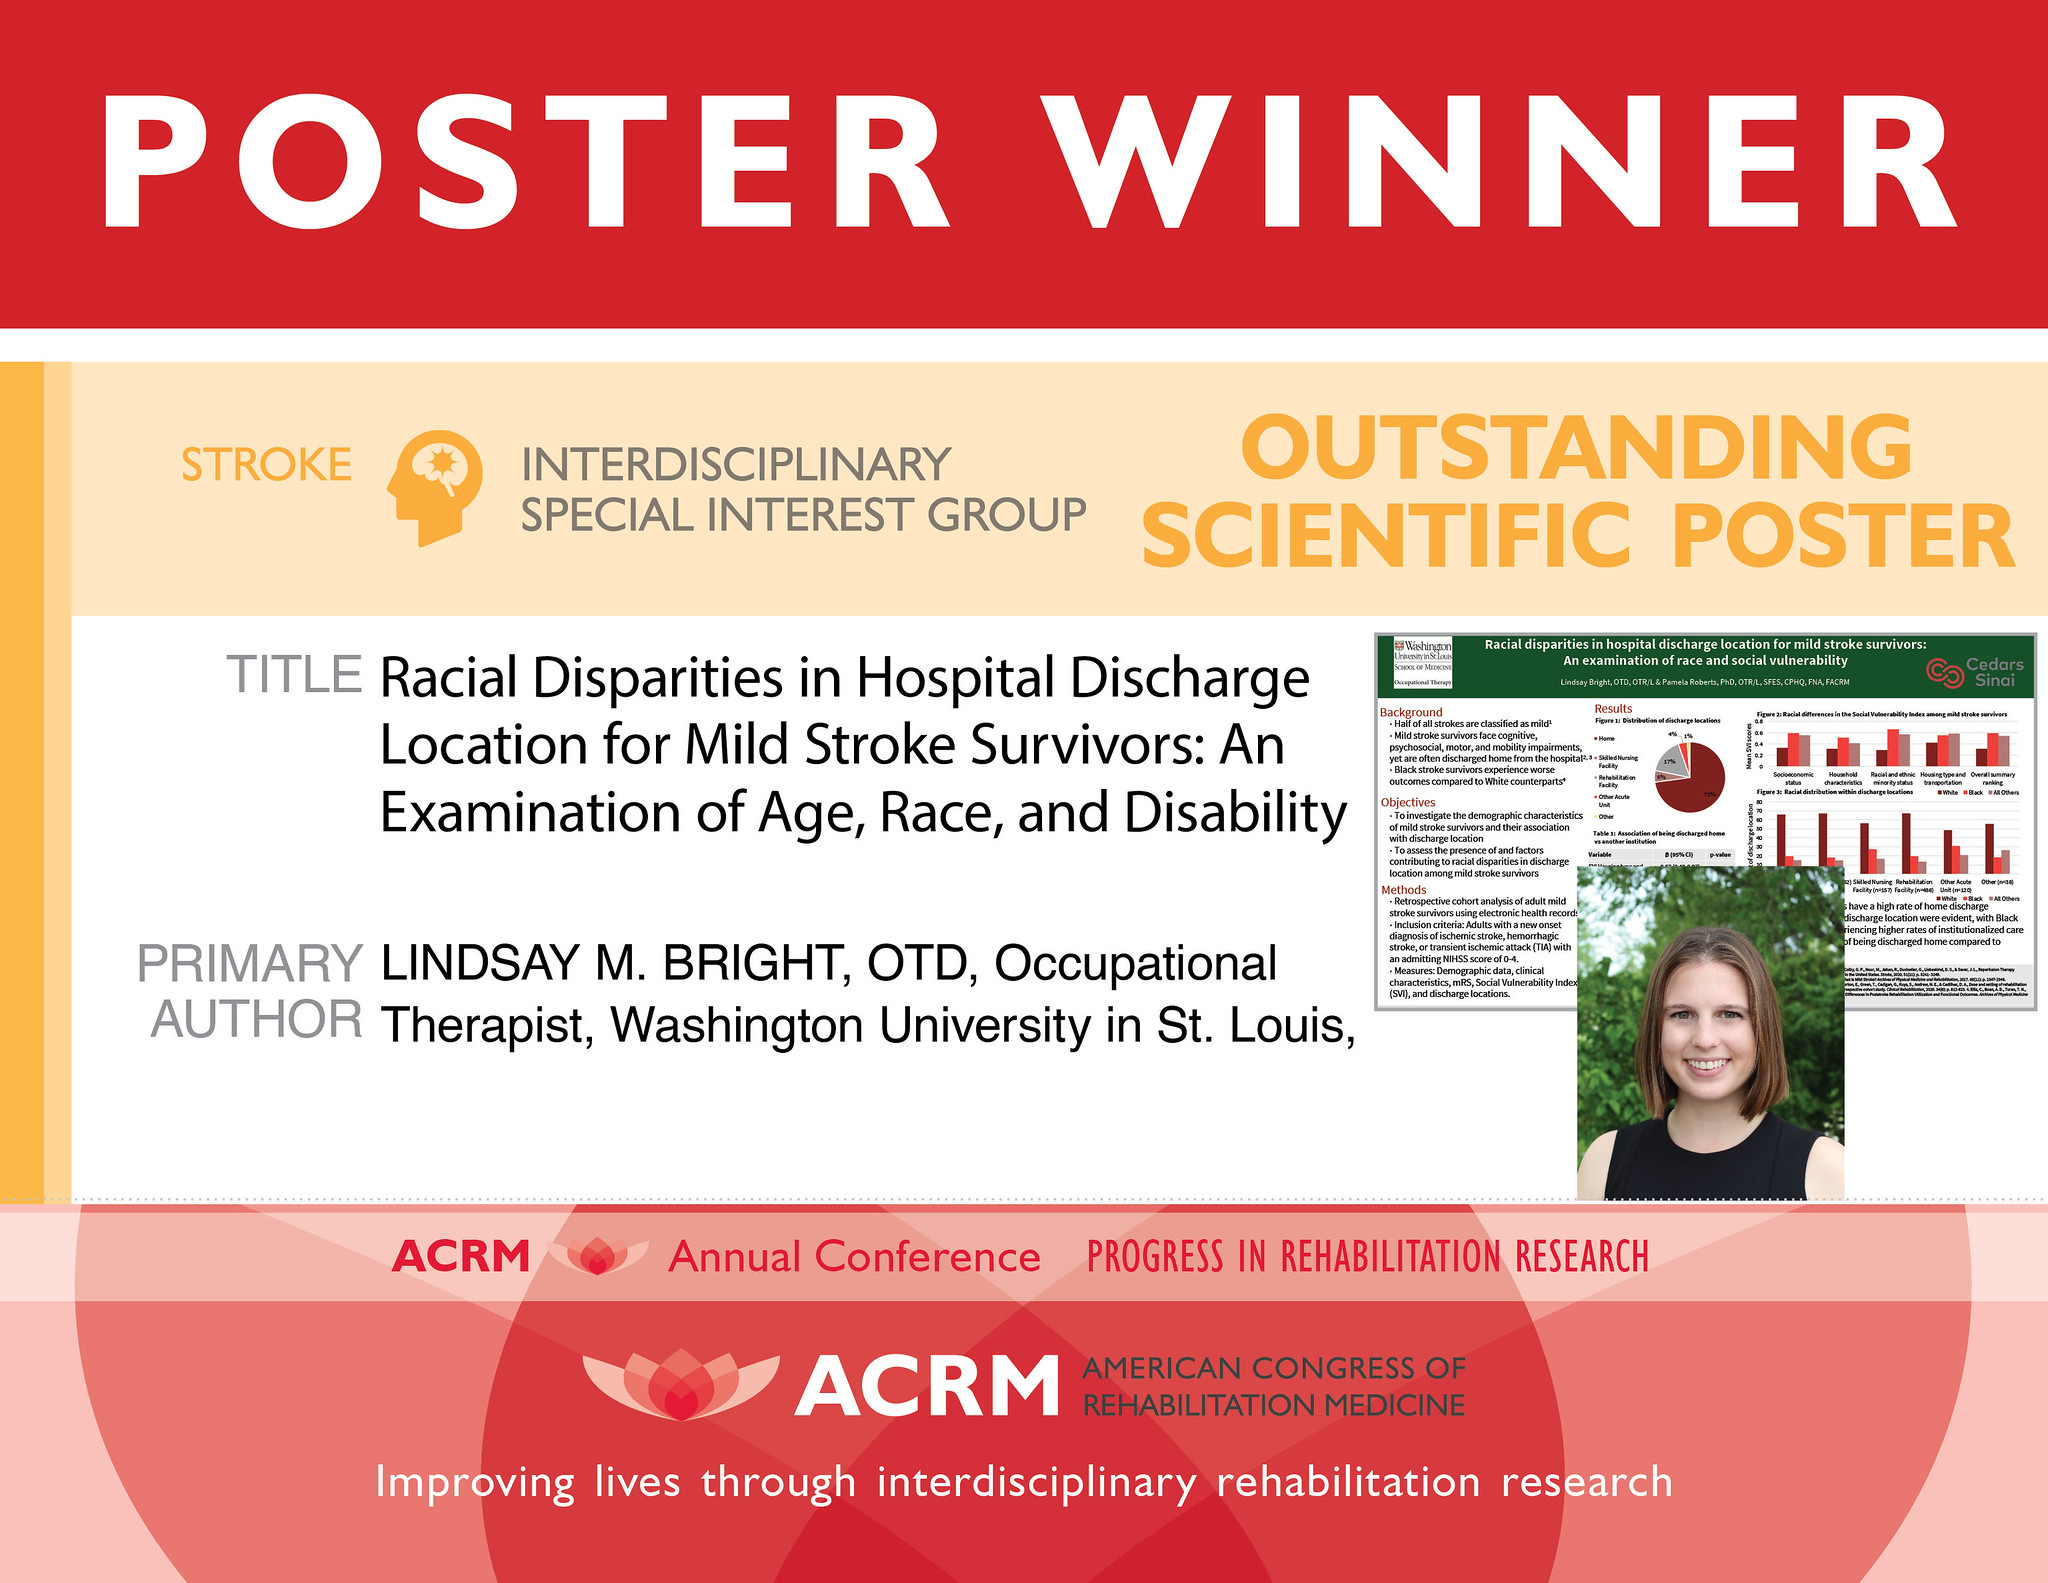 Stroke ISIG Outstanding Scientific Poster Award